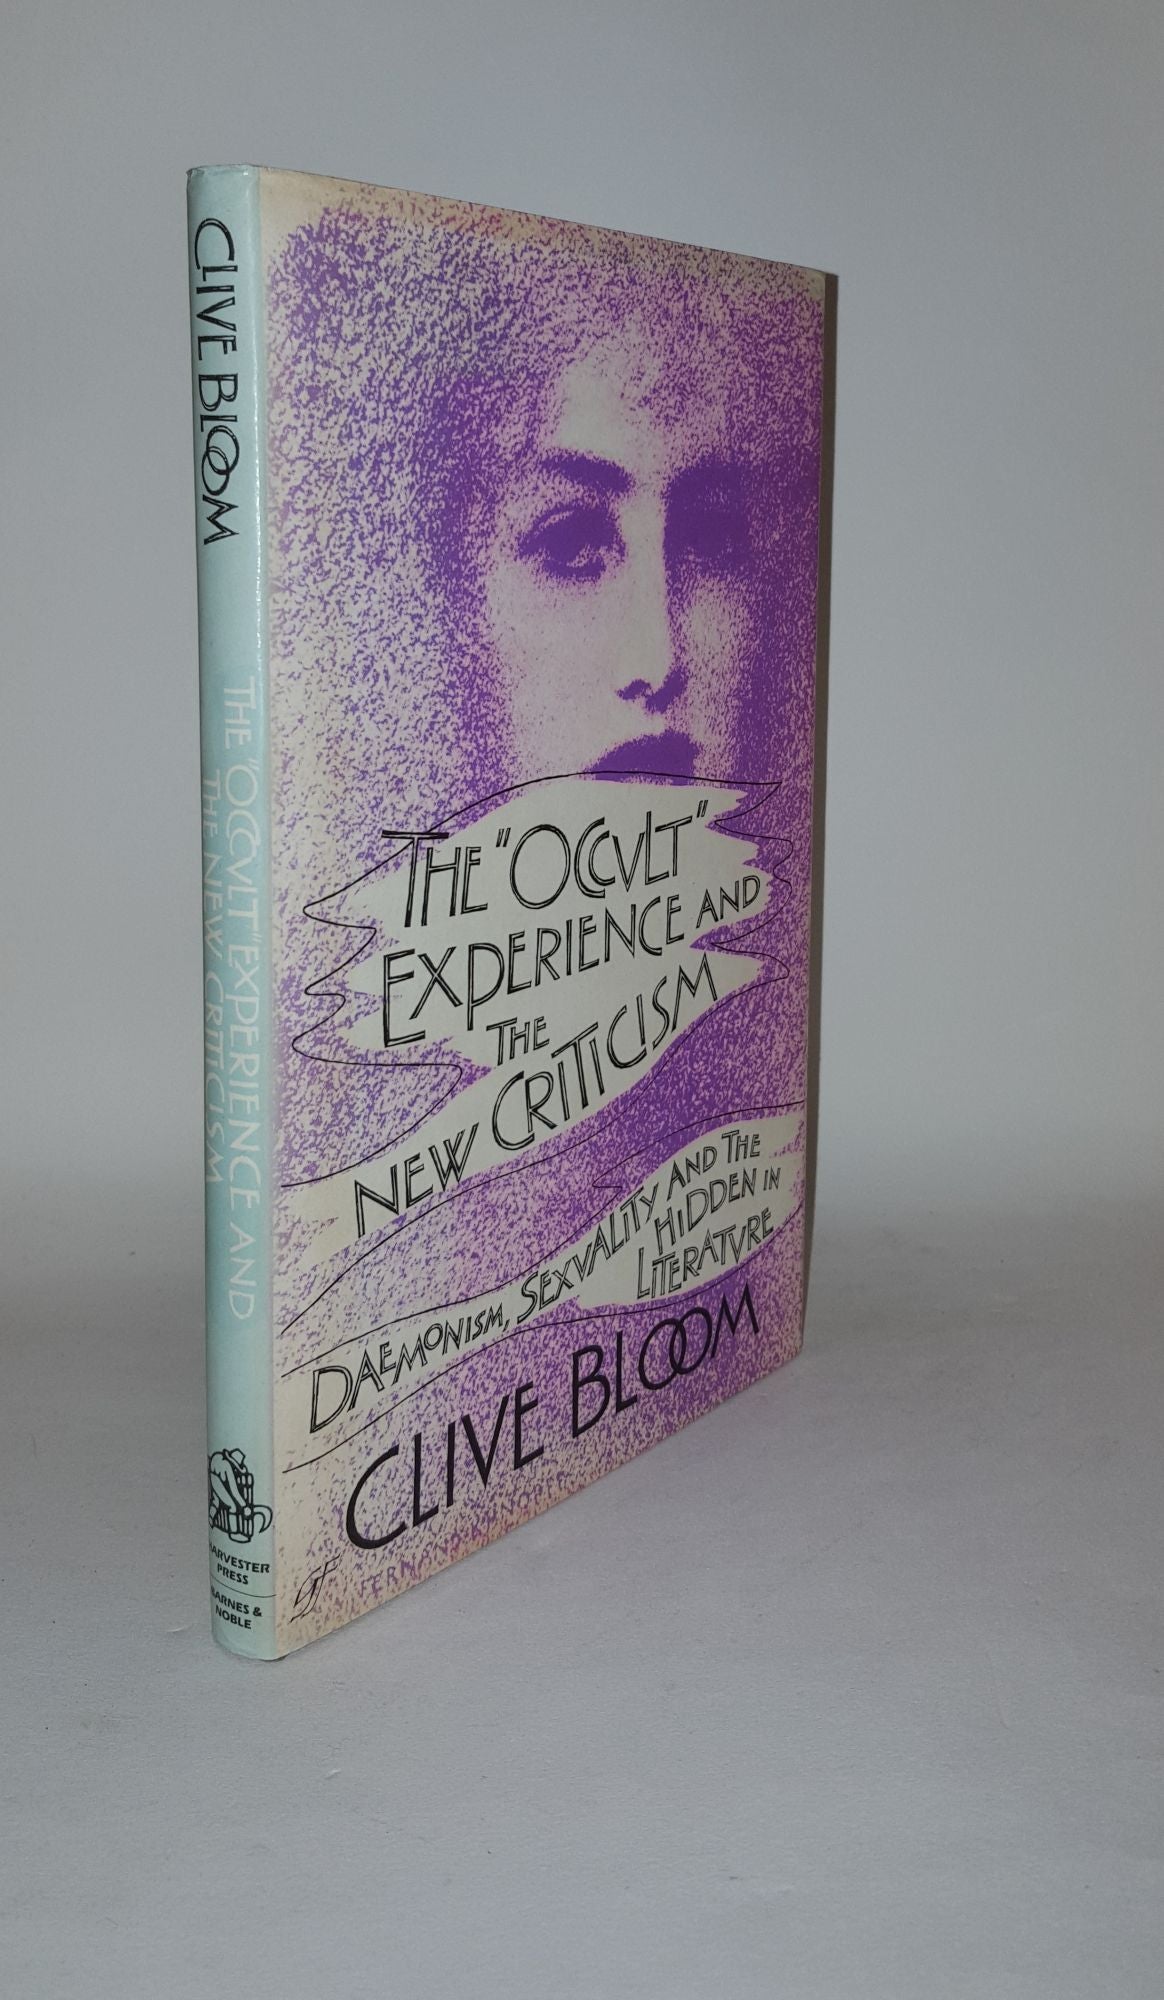 BLOOM Clive - The Occult Experience and the New Criticism Demonism Sexuality and the Hidden in Literature